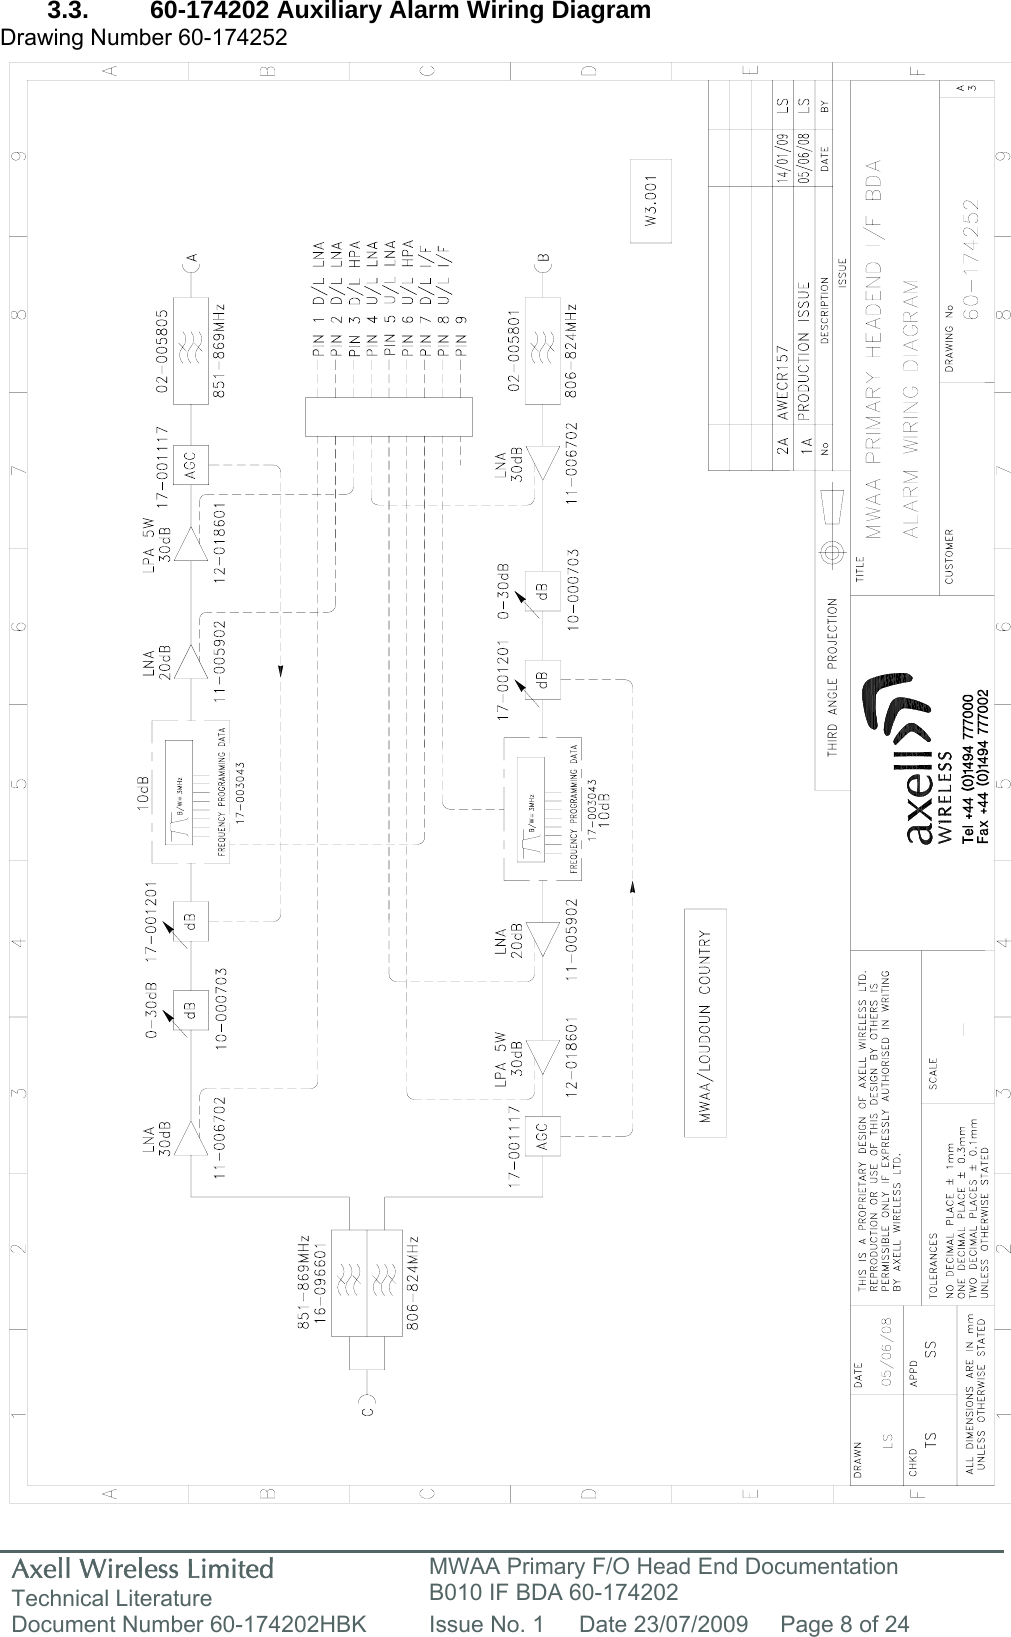 Axell Wireless Limited Technical Literature MWAA Primary F/O Head End Documentation B010 IF BDA 60-174202 Document Number 60-174202HBK  Issue No. 1  Date 23/07/2009  Page 8 of 24   3.3.  60-174202 Auxiliary Alarm Wiring Diagram Drawing Number 60-174252                                                        